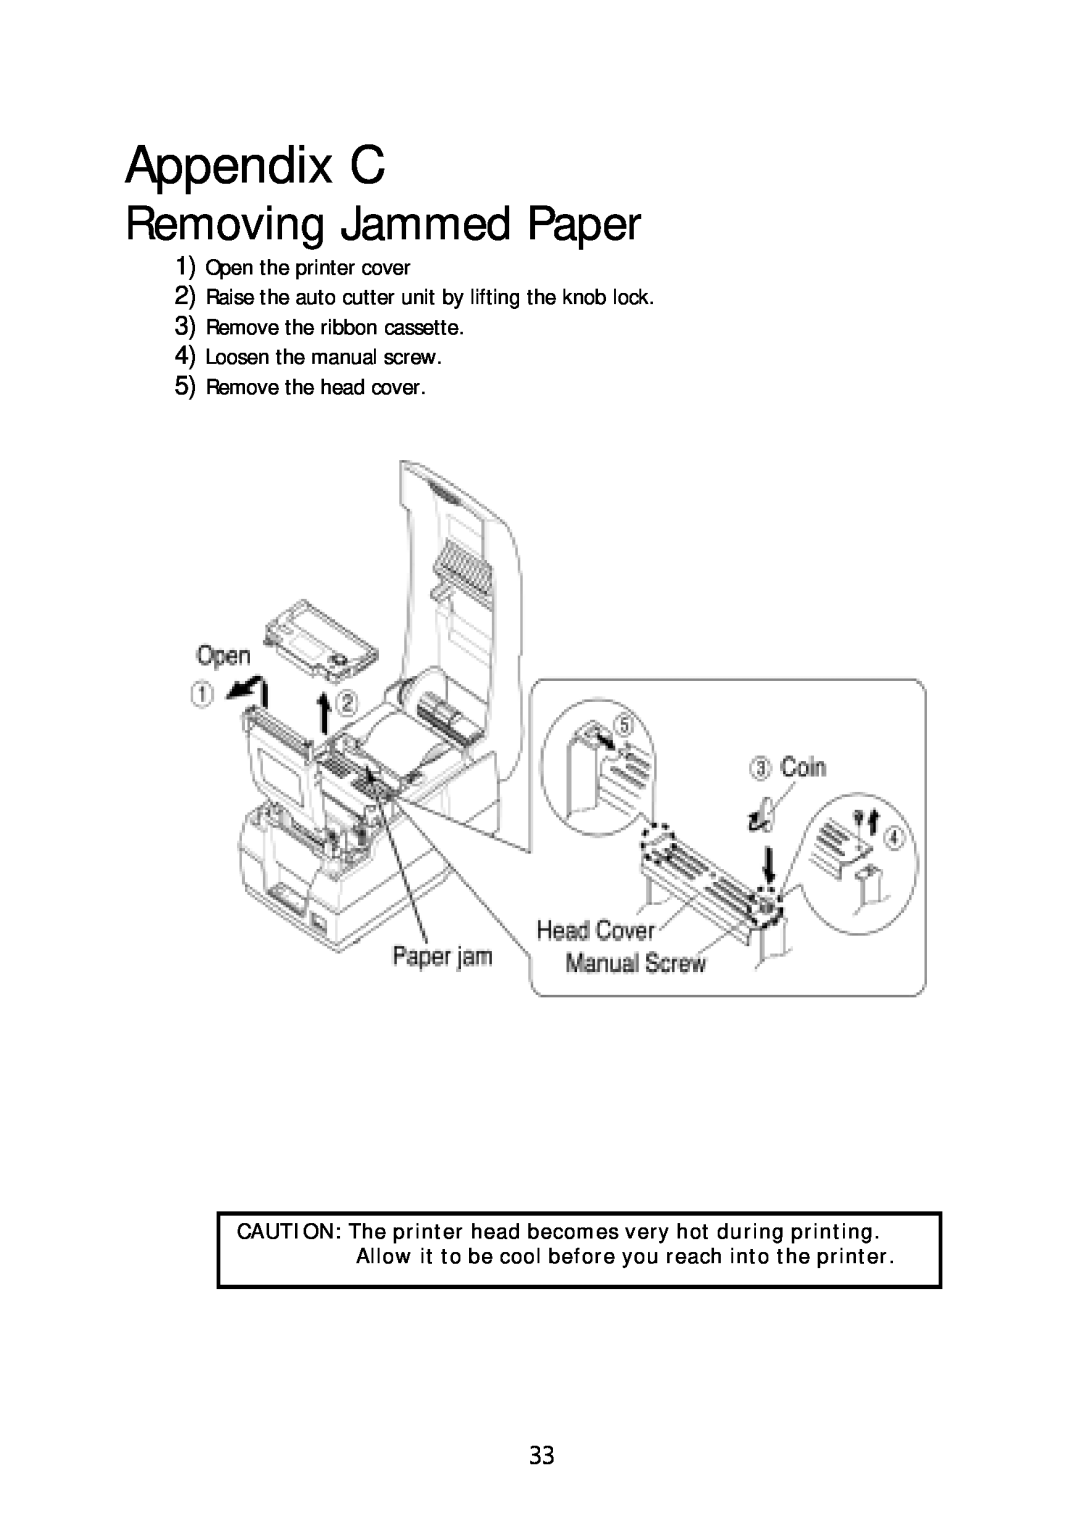 Sanyo SRP-270 specifications Appendix C, Removing Jammed Paper 